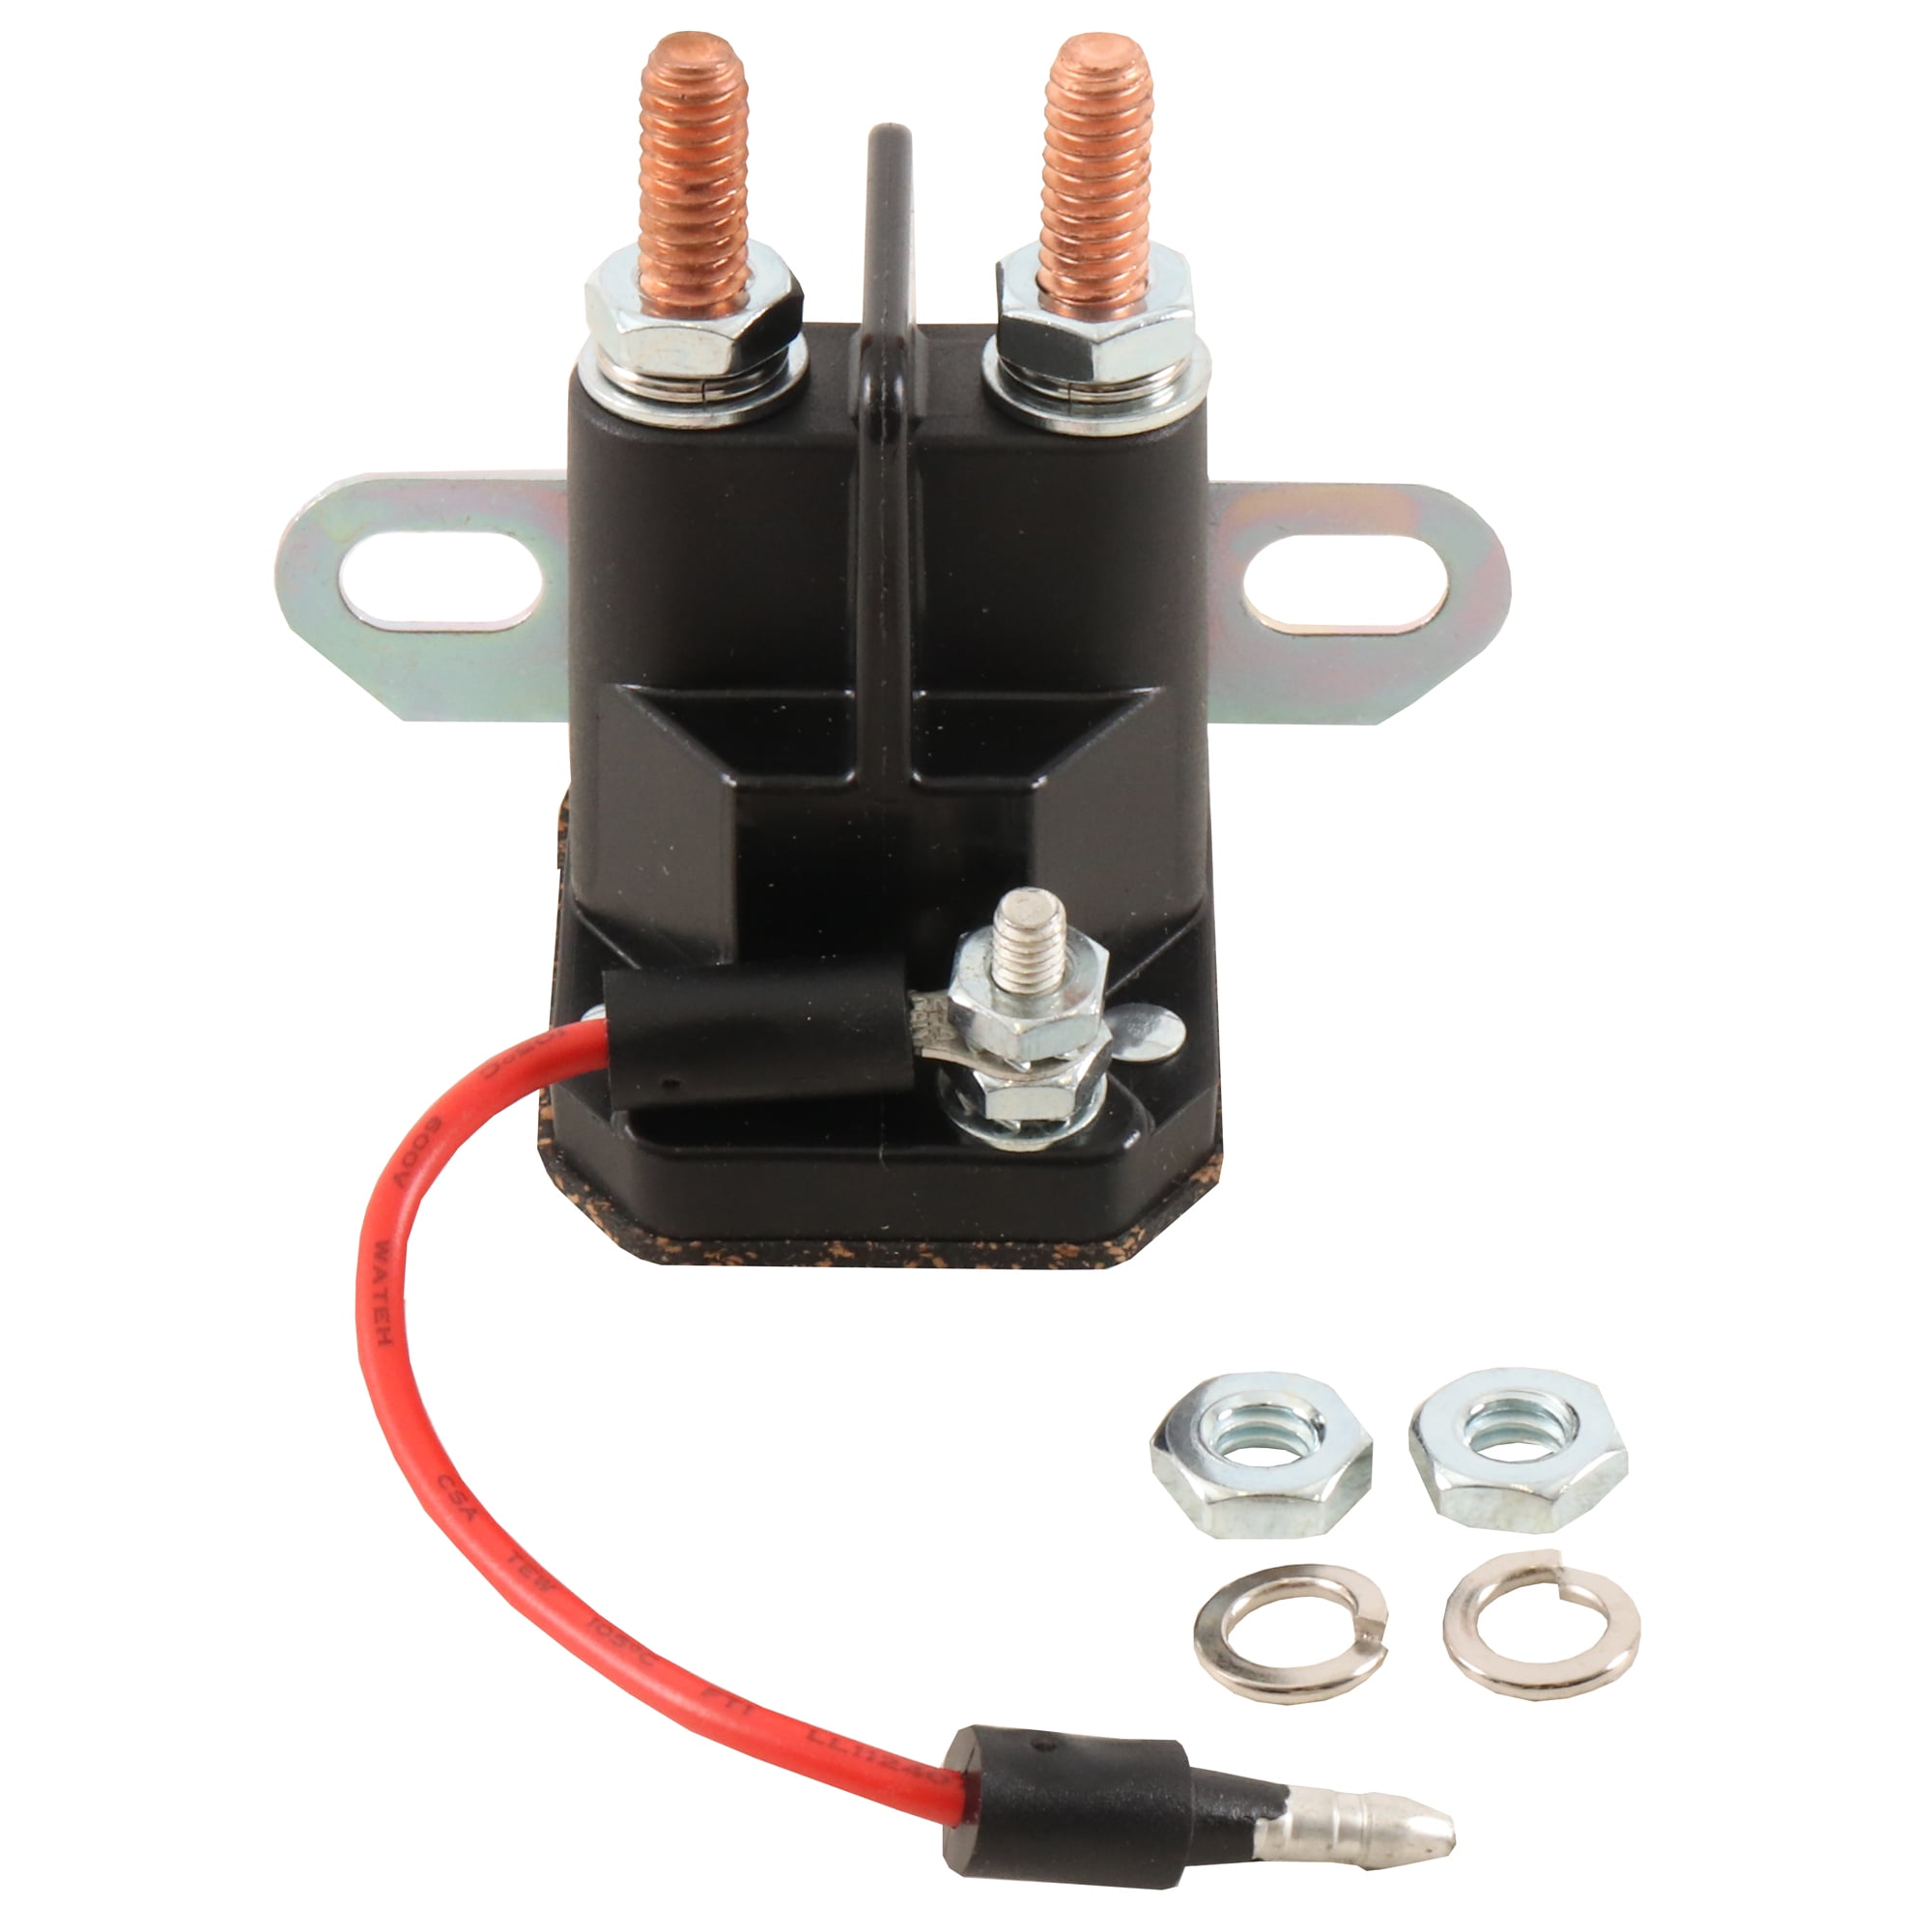 New Db Electrical 240 Polaris Atv Solenoid Compatible With Replacement For Relay 250 300 400 500 600 700 Almost All Models Walmart Com Walmart Com